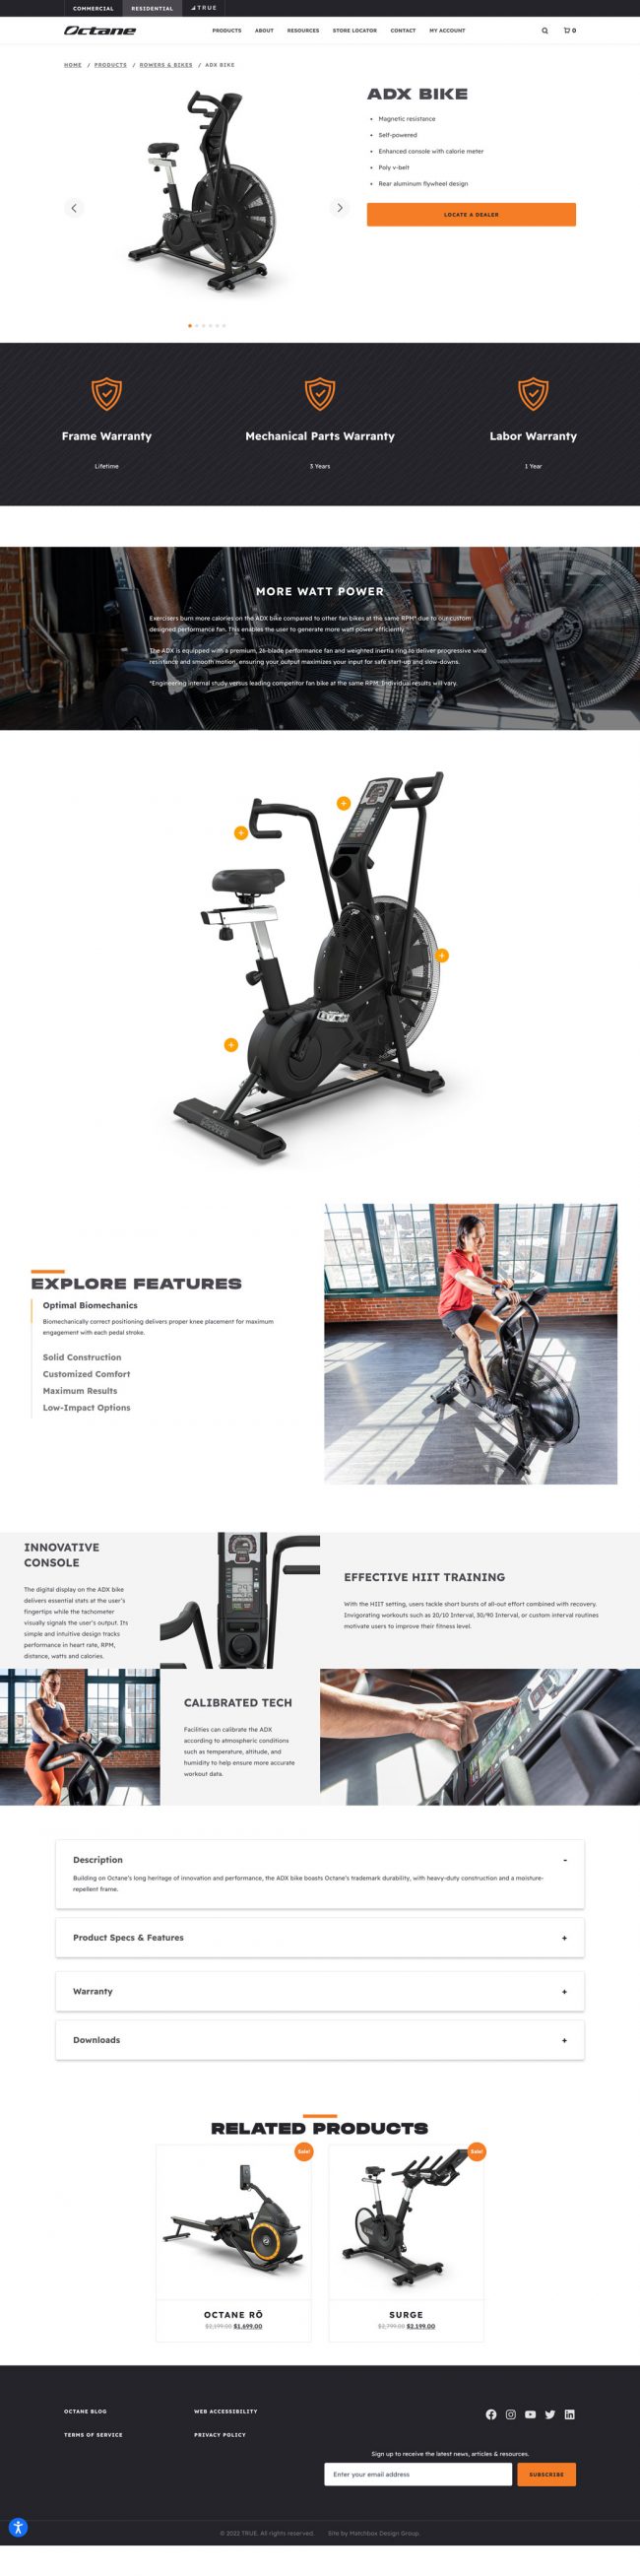 Octane Fitness Website Rebuild Product Page